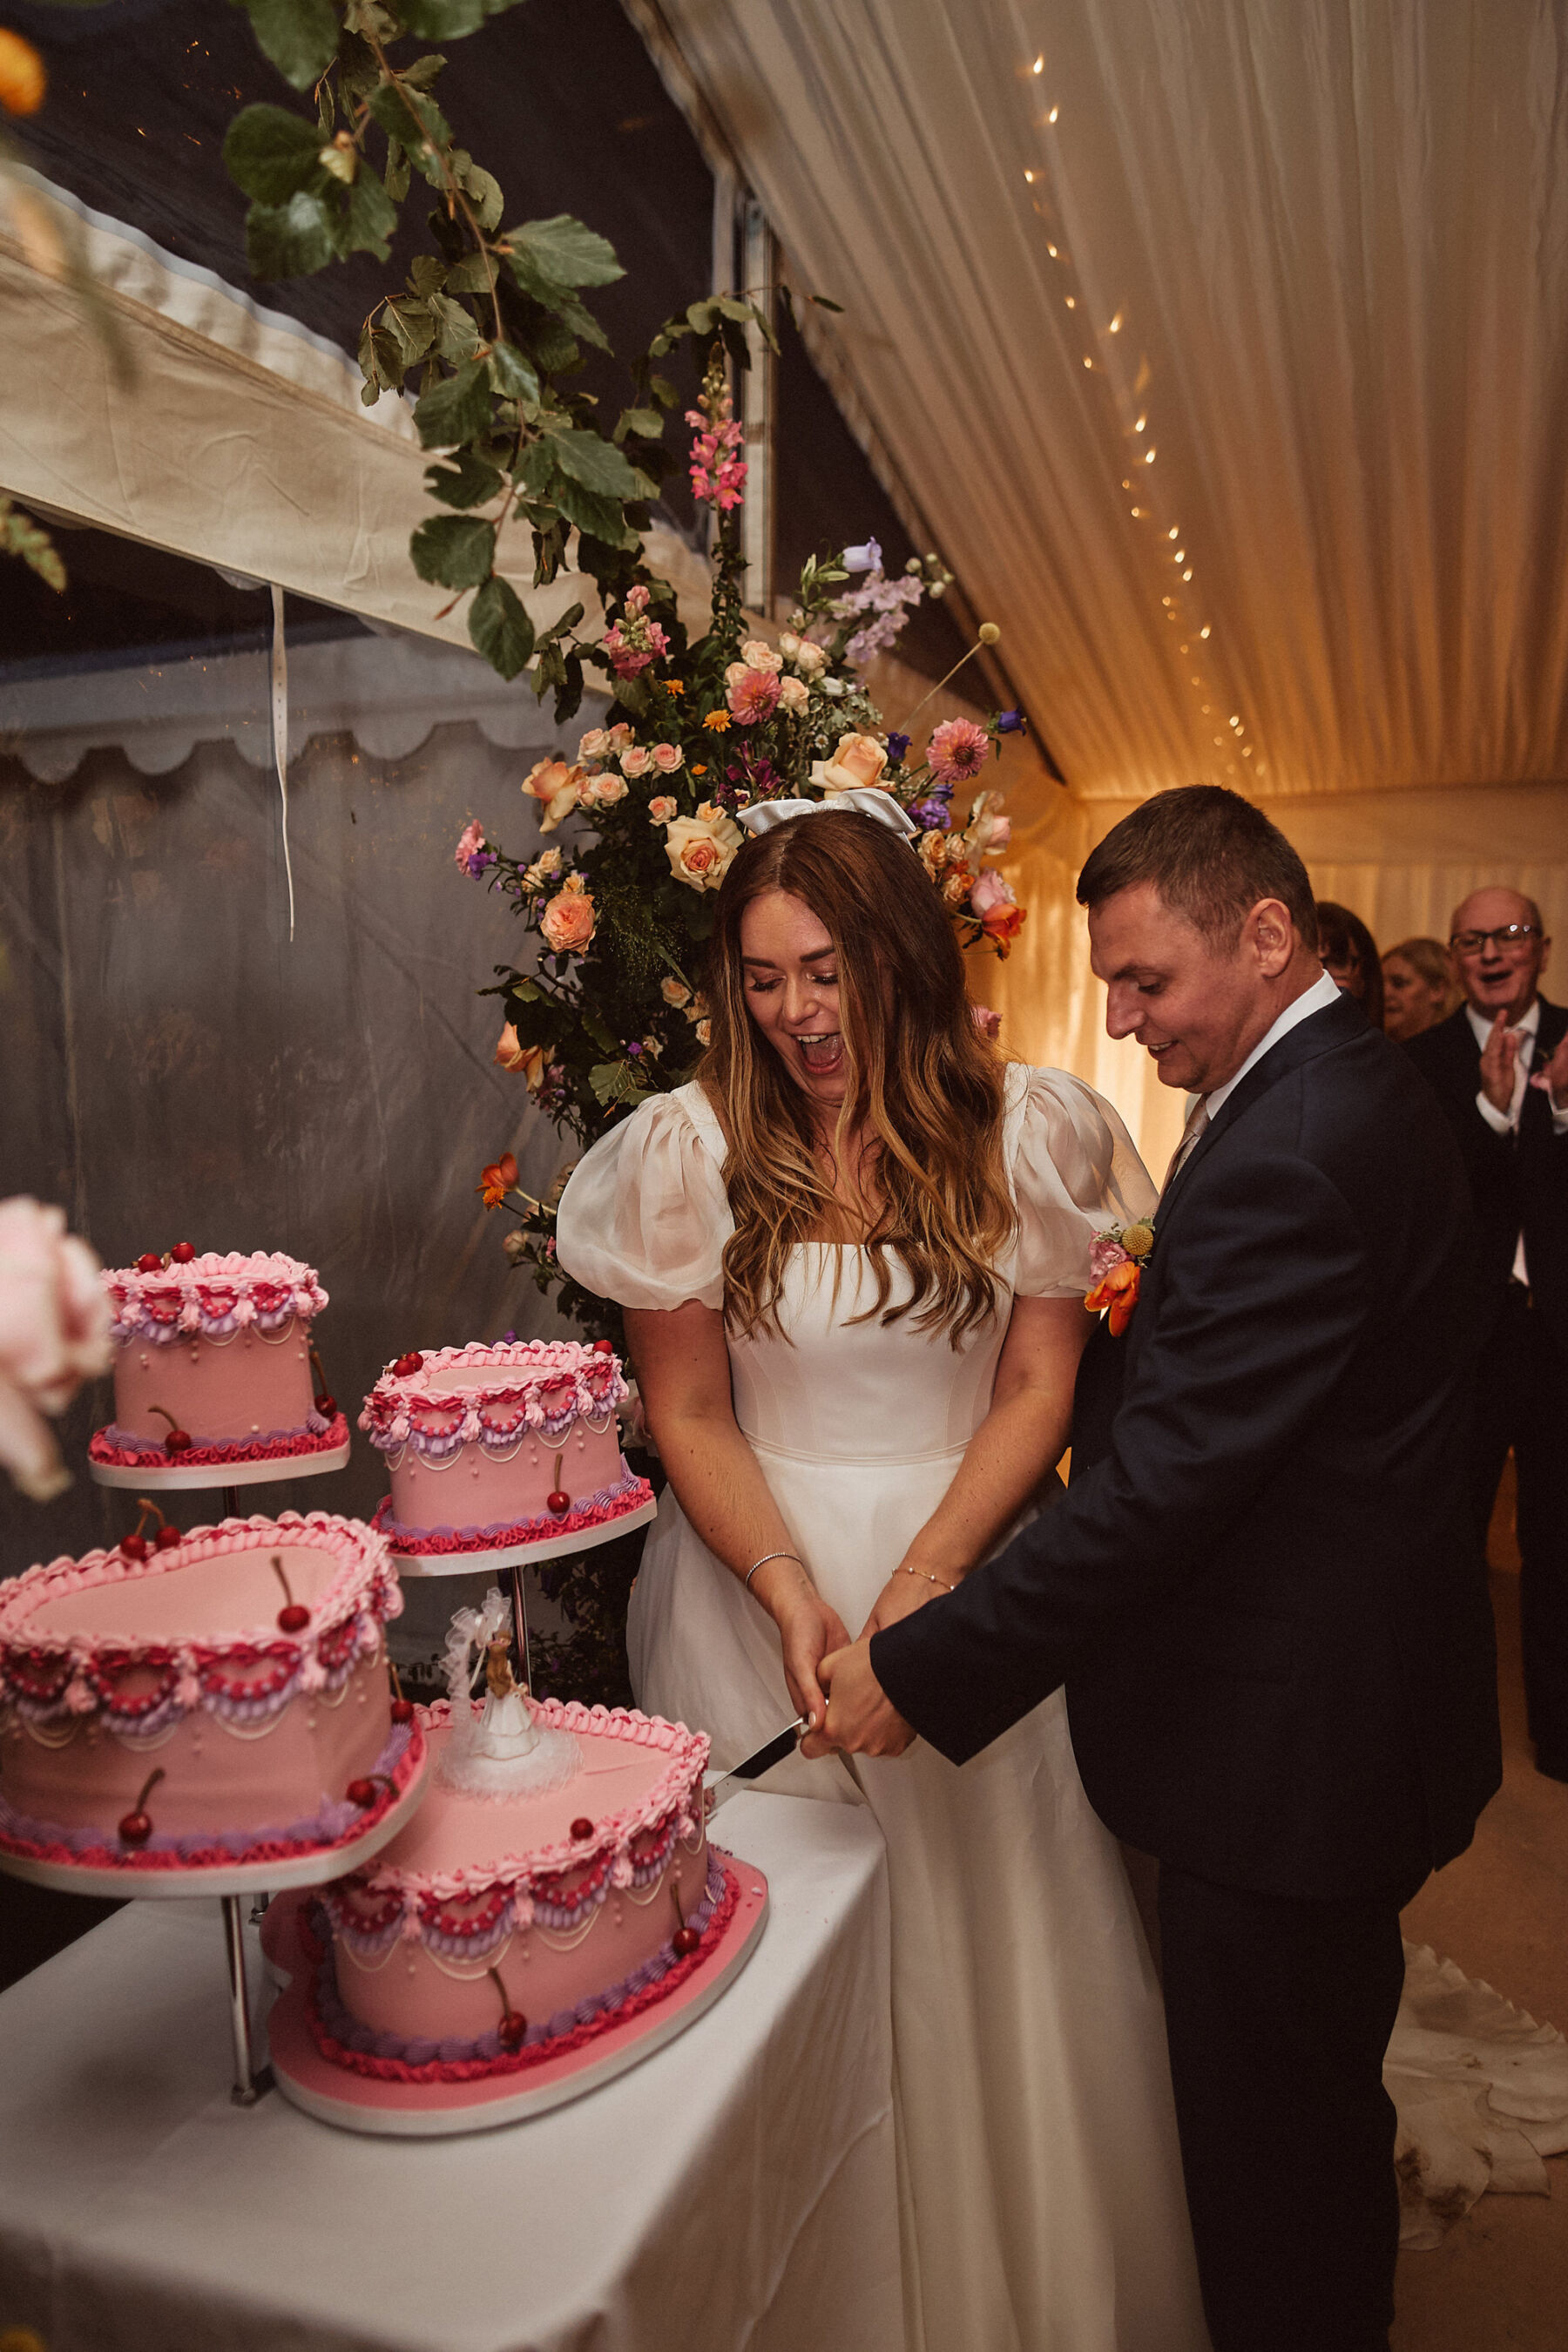 Bride and groom cutting the cake. There are 4 pink, heart shaped cakes with frilly retro style icing.